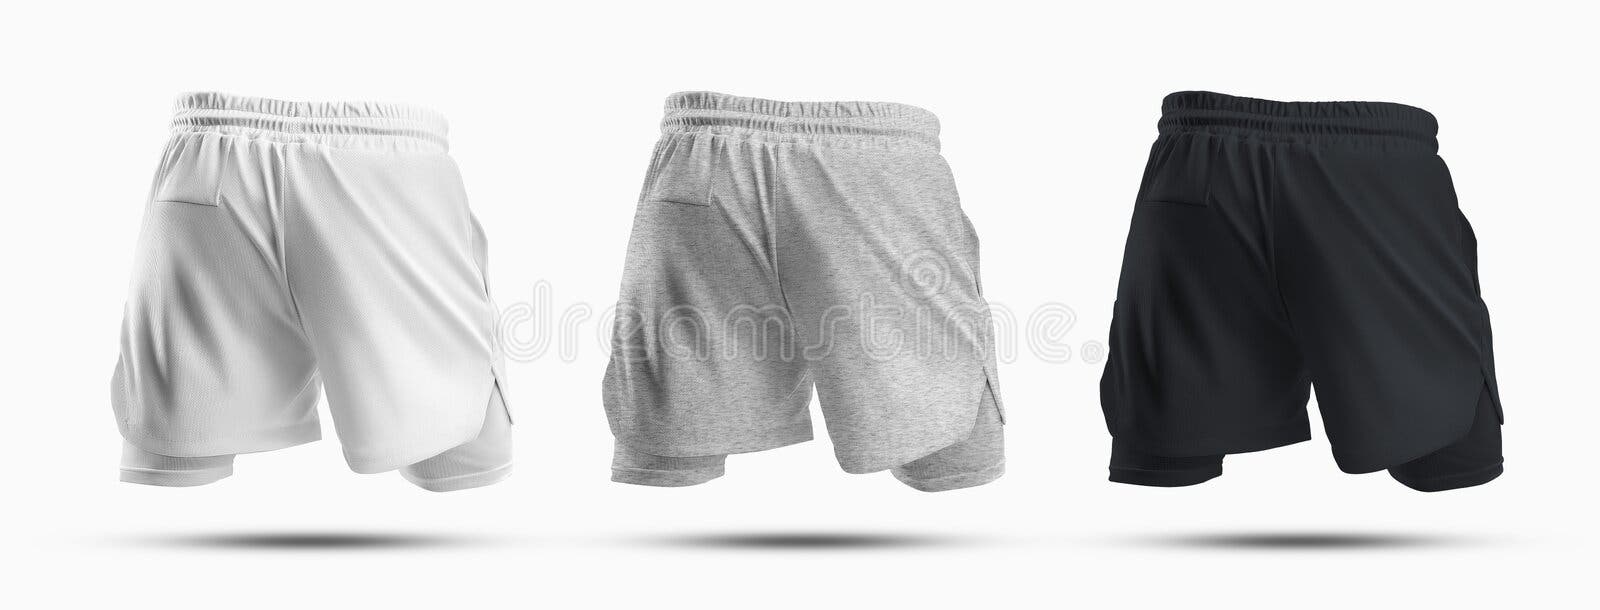 Mockups of Sports Men`s Shorts with Compression Undershorts 3D